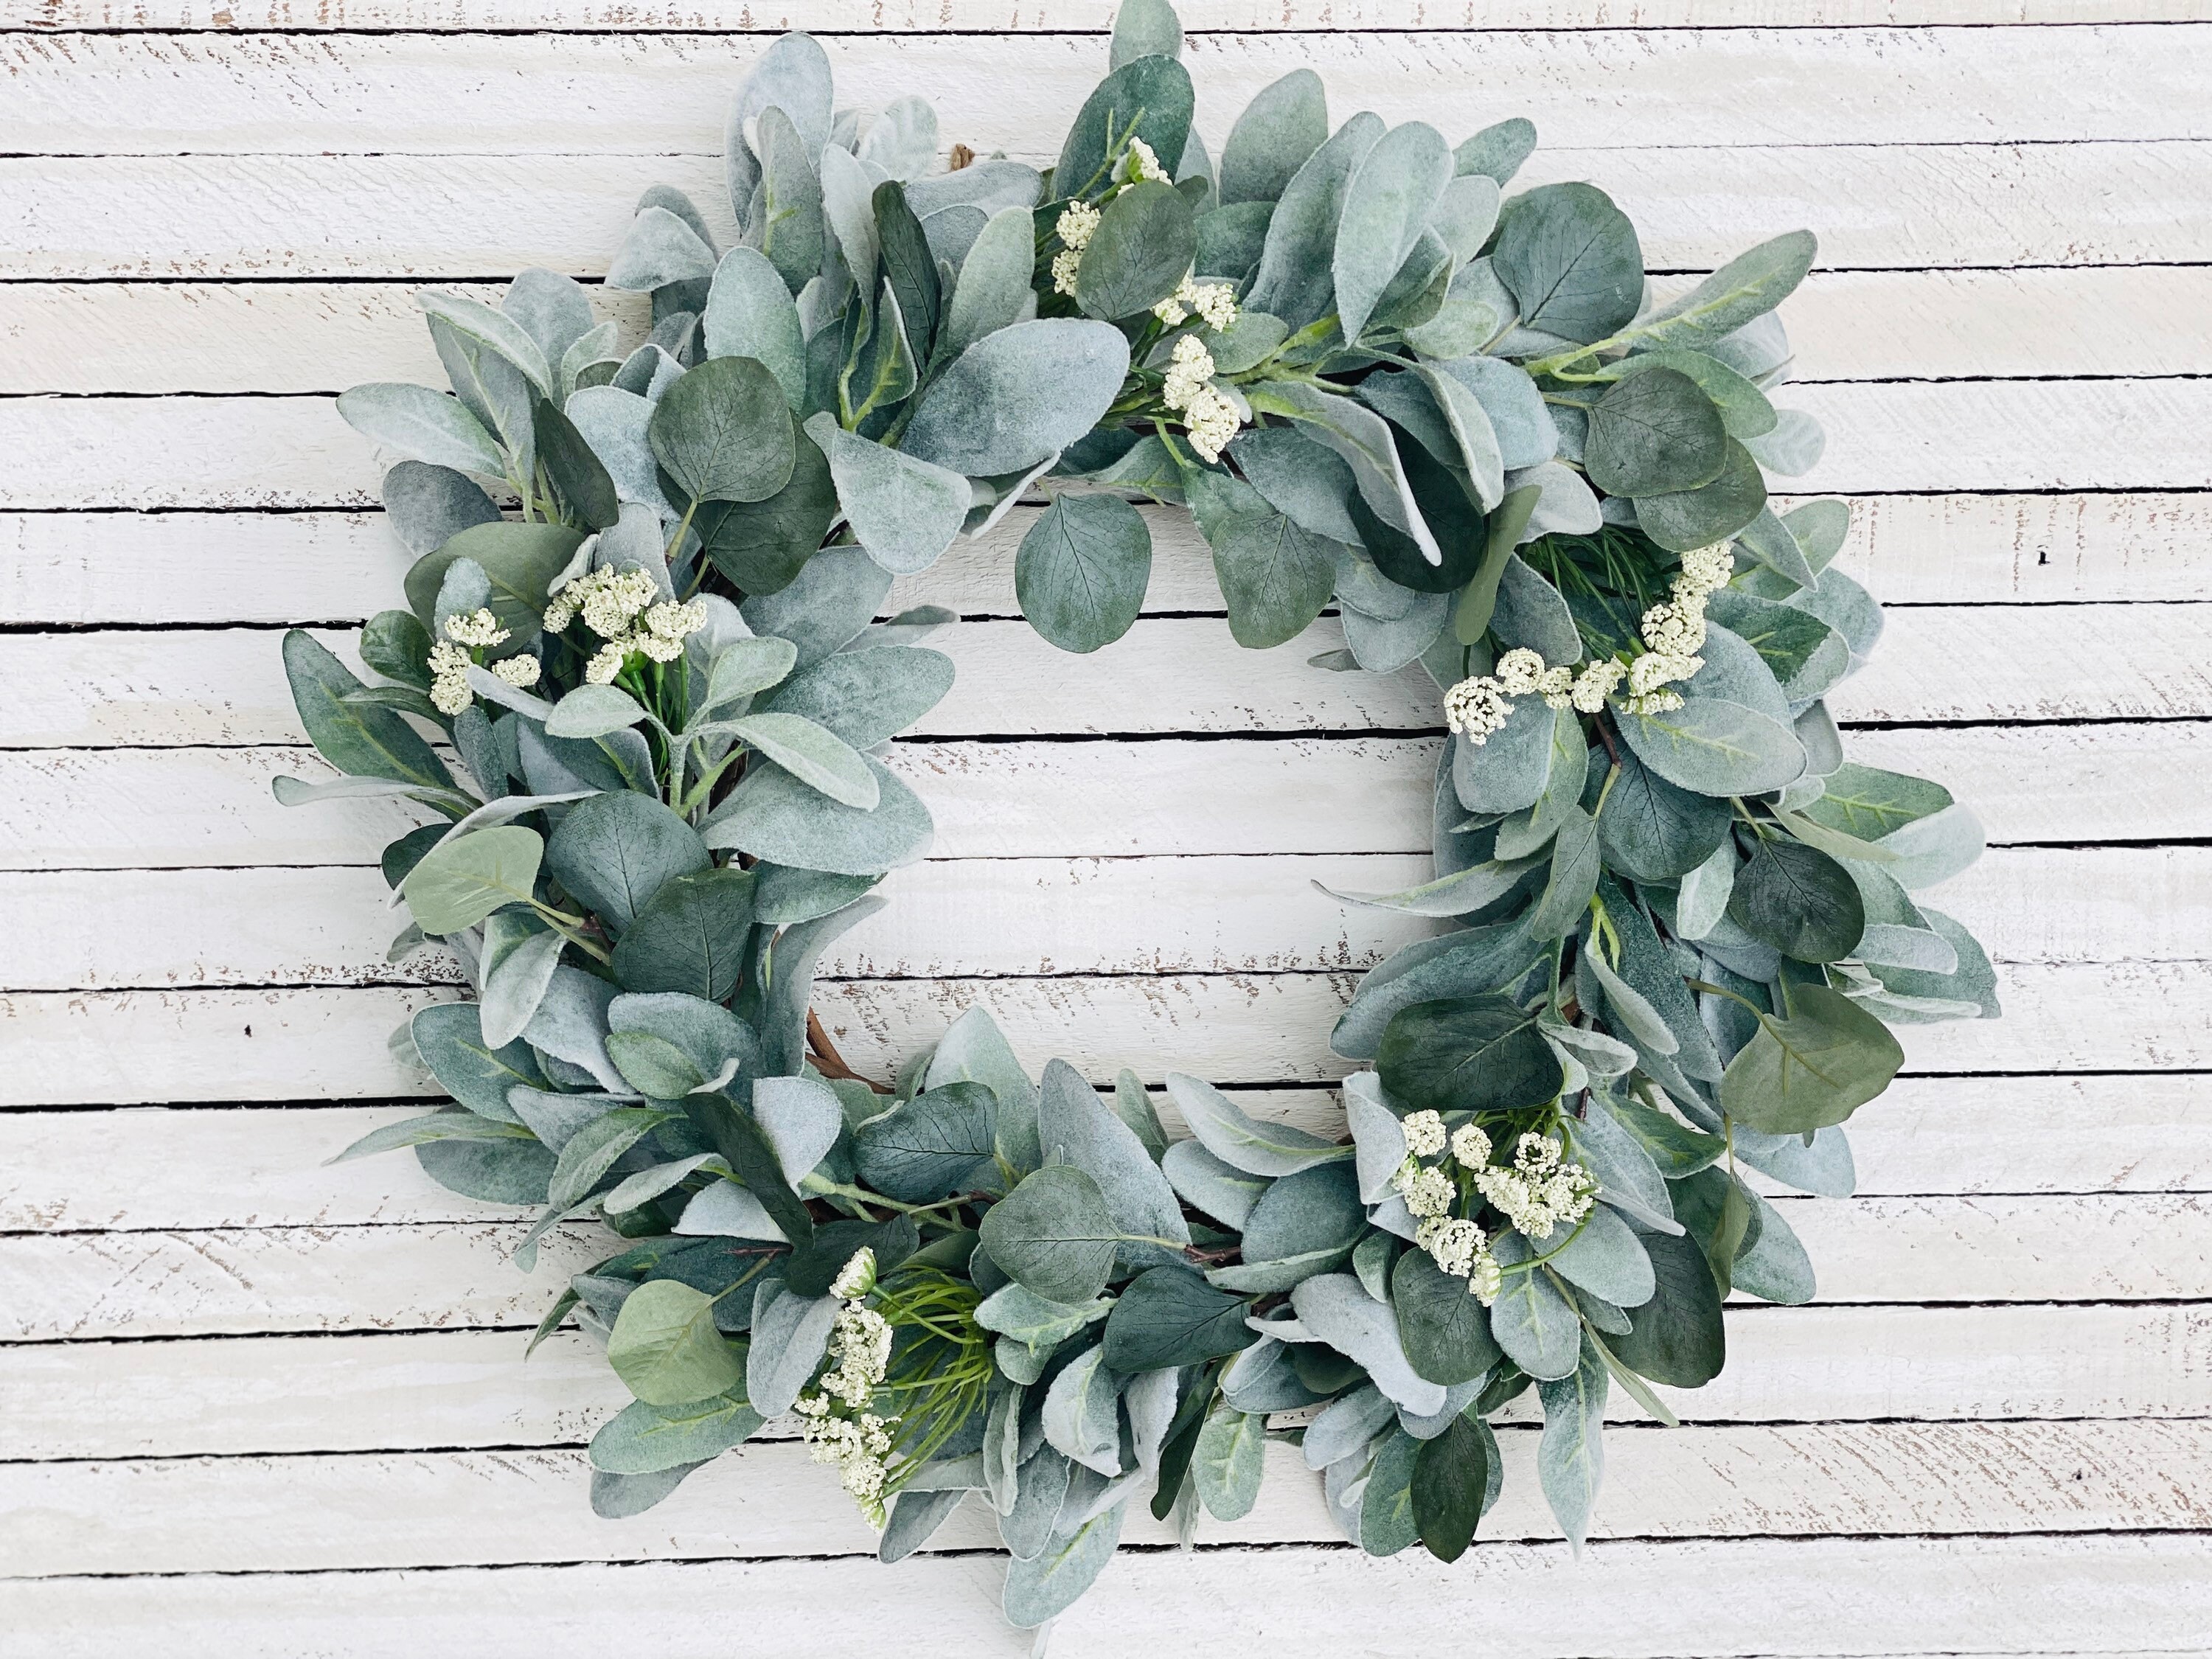 Greenery Wreath Year Round, LARGE 21 Eucalyptus Wreath for Front Door,  Everyday Wreath, Year Round Farmhouse Wreath With Black Striped Bow 